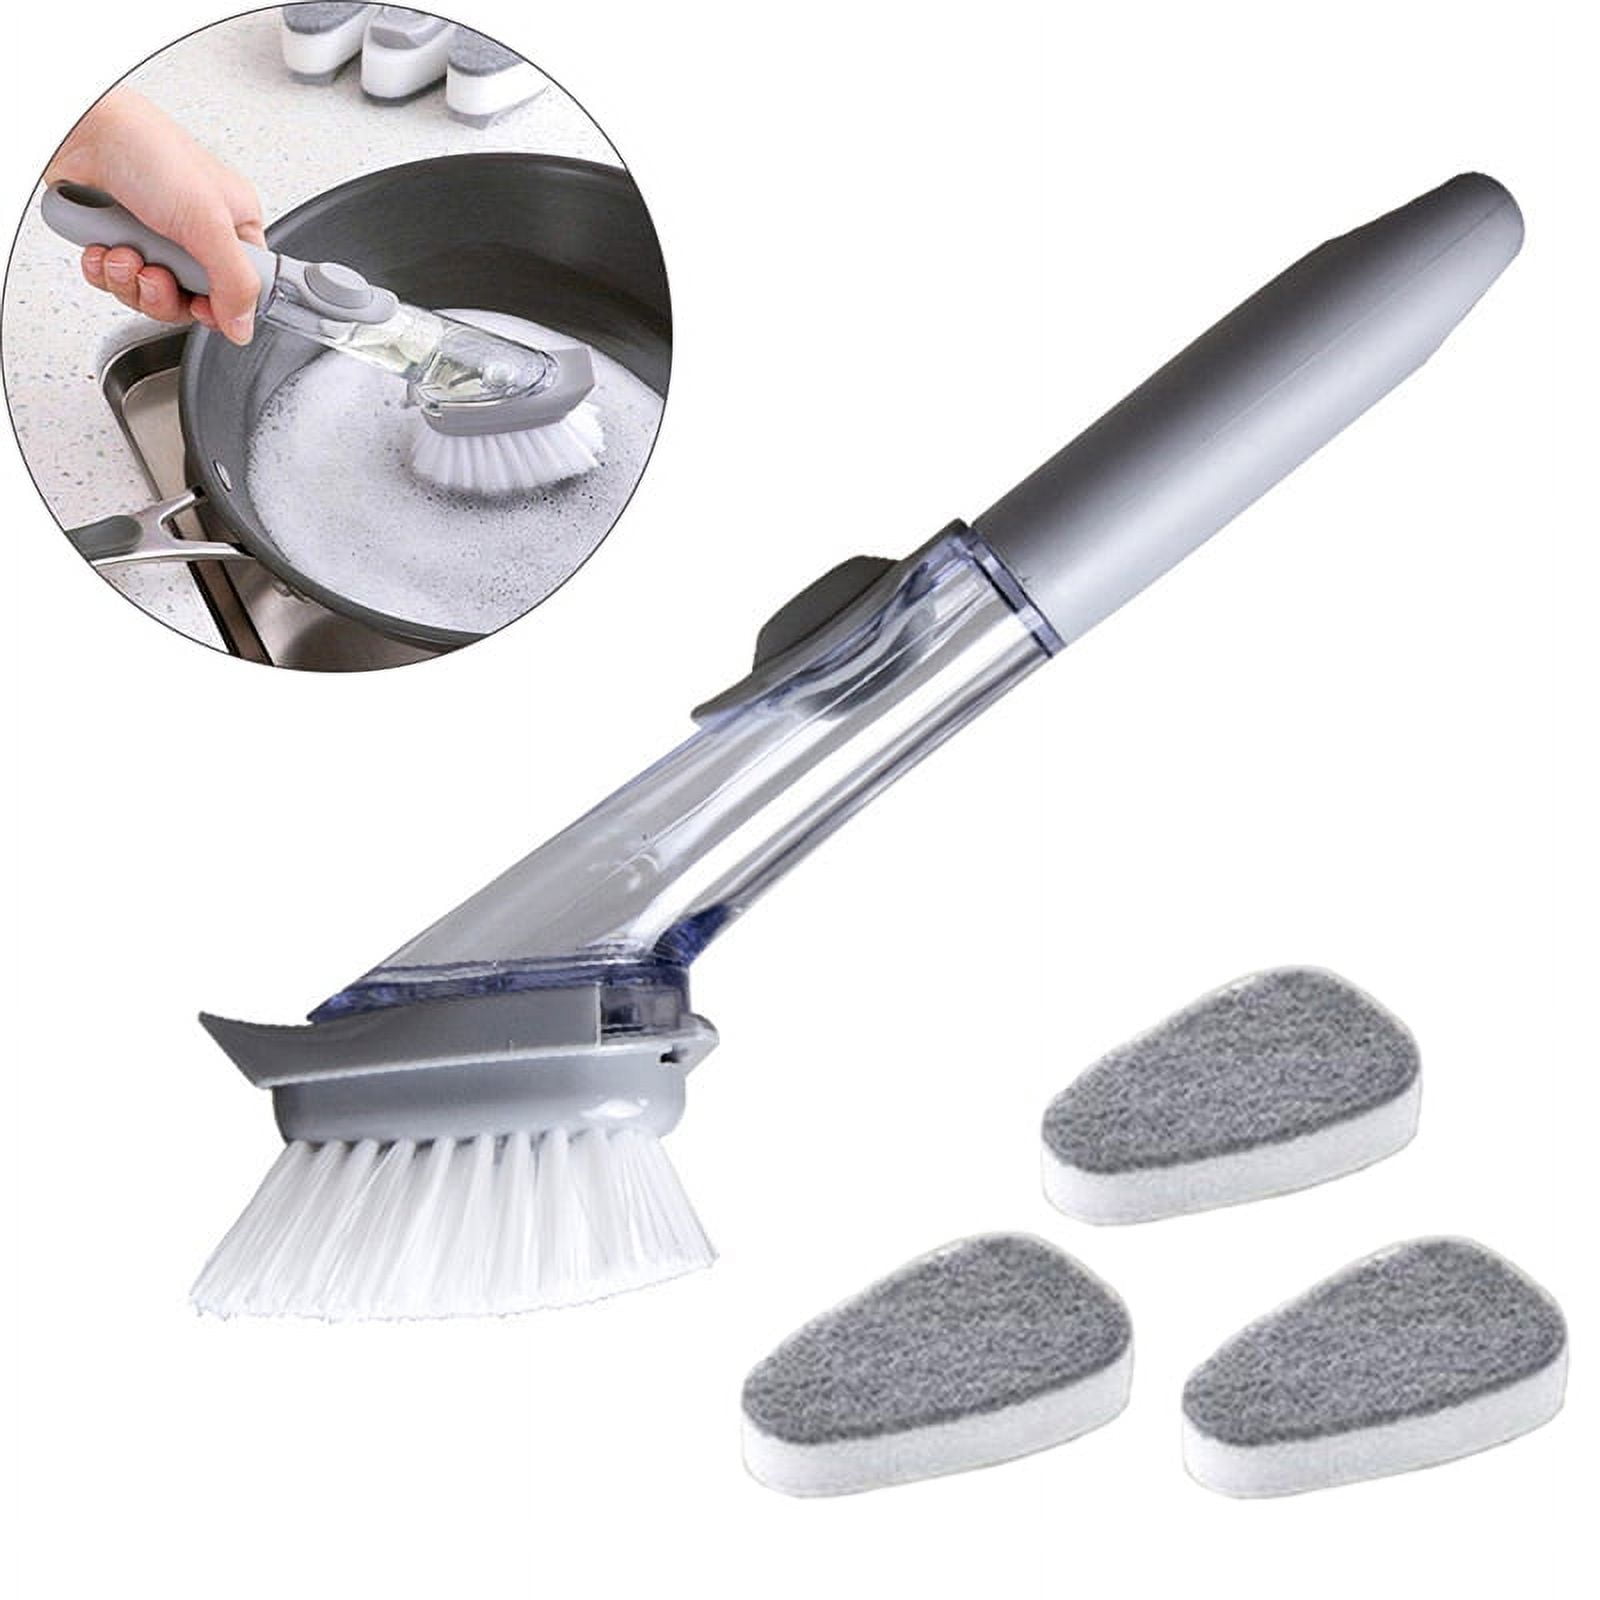 Dish and Pot brush scrubber – We Fill Good